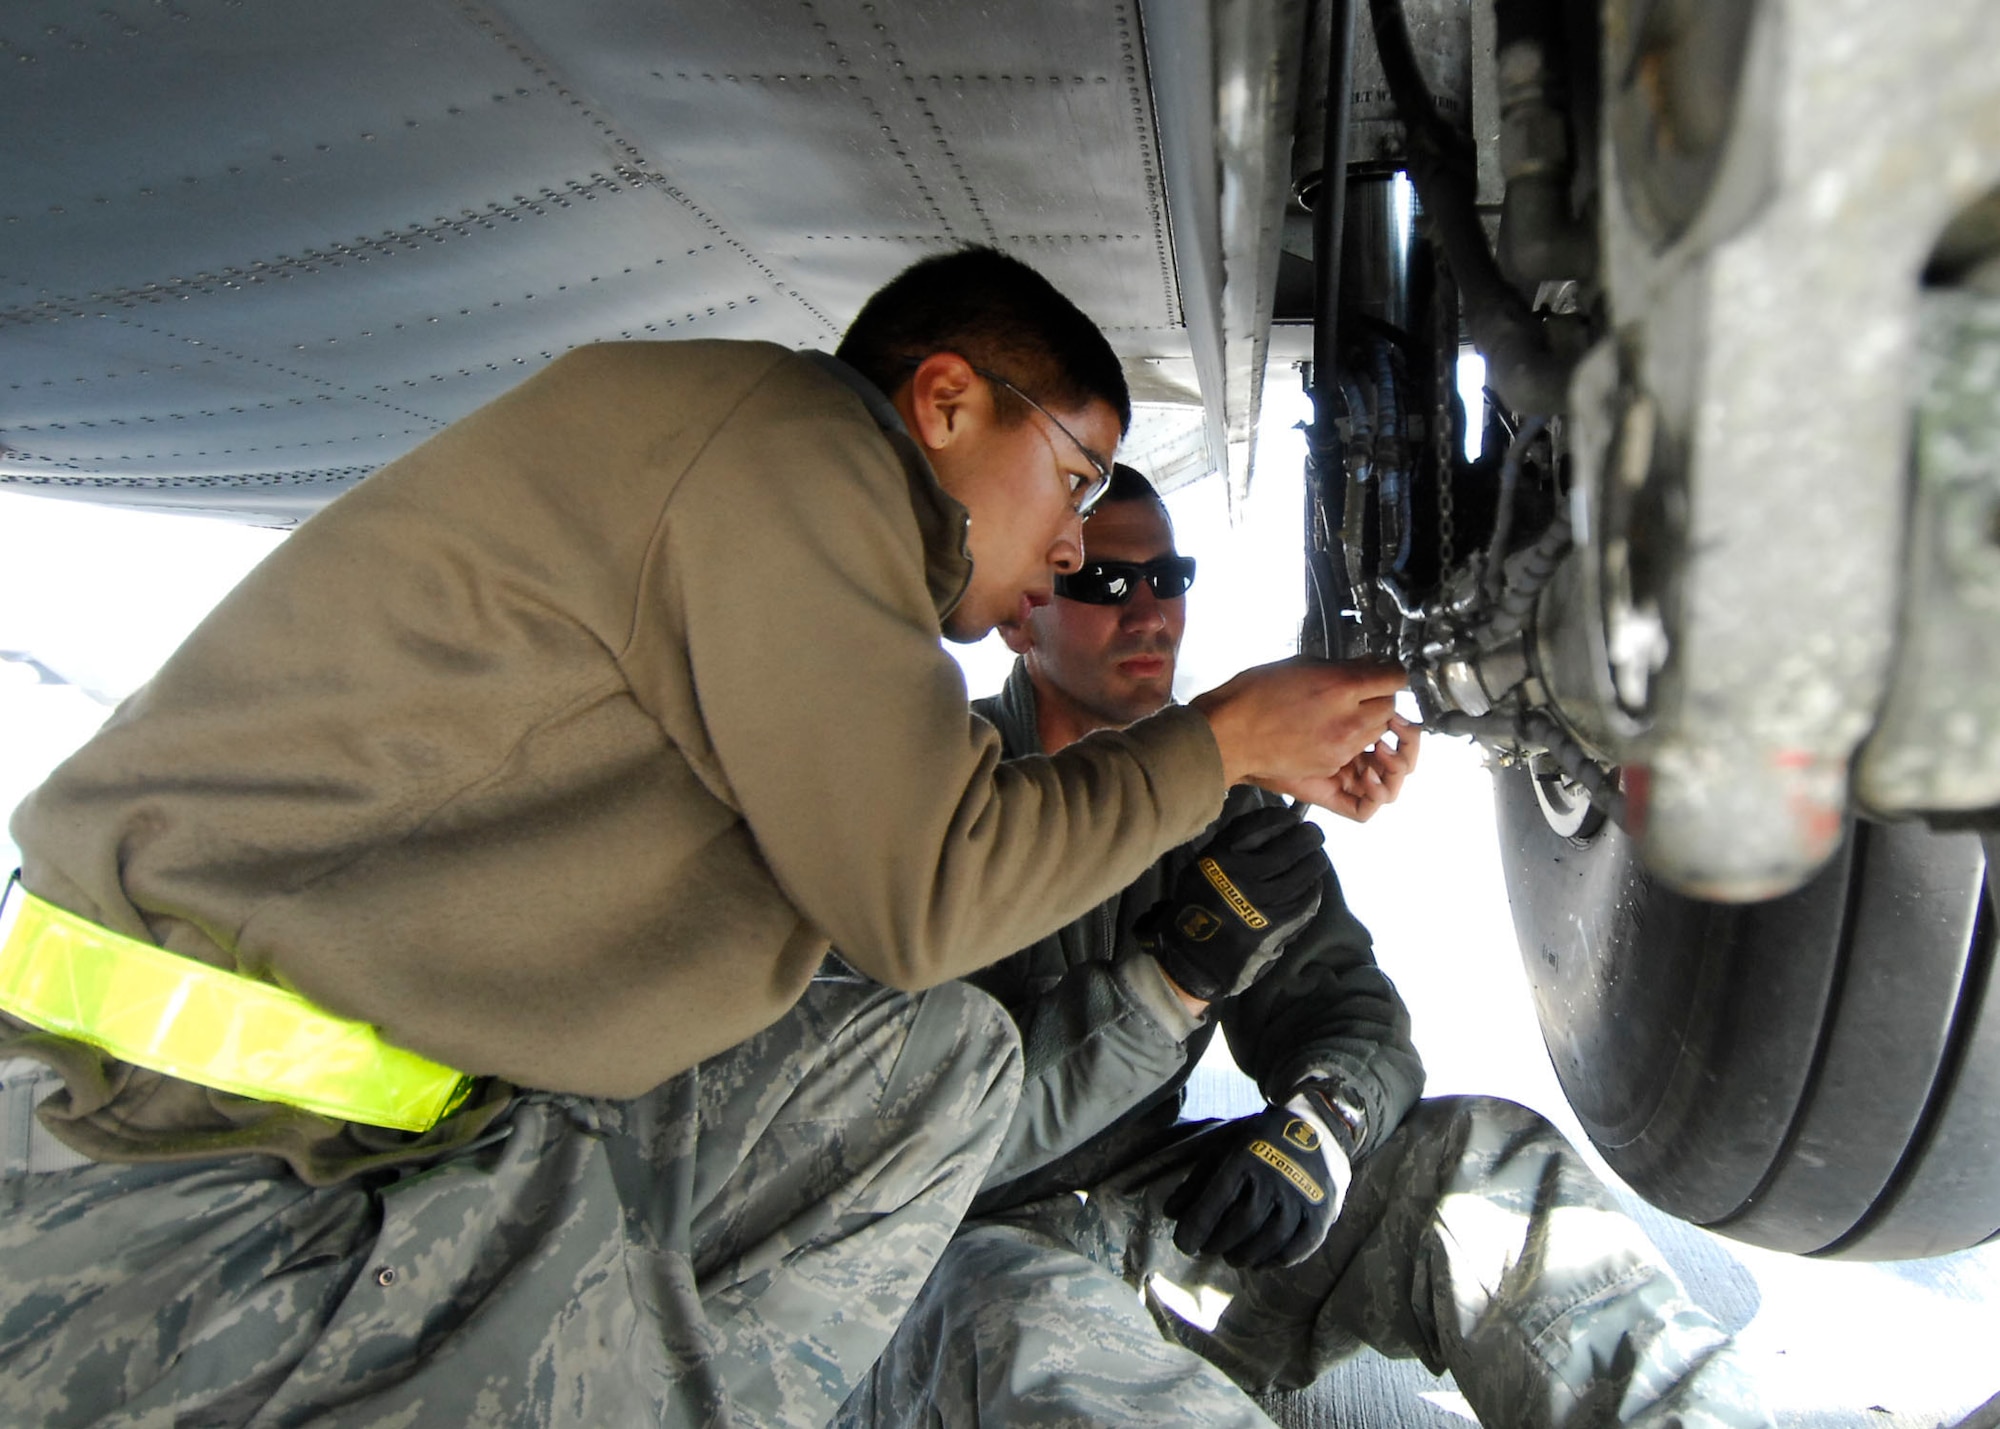 BAGRAM AIRFIELD, Afghanistan -- Senior Airman Elliroy Defiesta (left) assists Tech. Sgt. Mike Smith (right) while performing landing gear maintenance on a C-130 Hercules, Dec. 7, 2009.  During an inspection on the aircraft the Airmen found a problem with the landing gear which they immediately fixed to keep the aircraft on time for future missions.  Both Airmen, crew chiefs from the 455th Expeditionary Aircraft Maintenance Squadron, are deployed from the Nevada Air National Guard's 152nd Airlift Wing and hail from Reno, Nev.  (U.S. Air Force photo/Senior Airman Felicia Juenke)